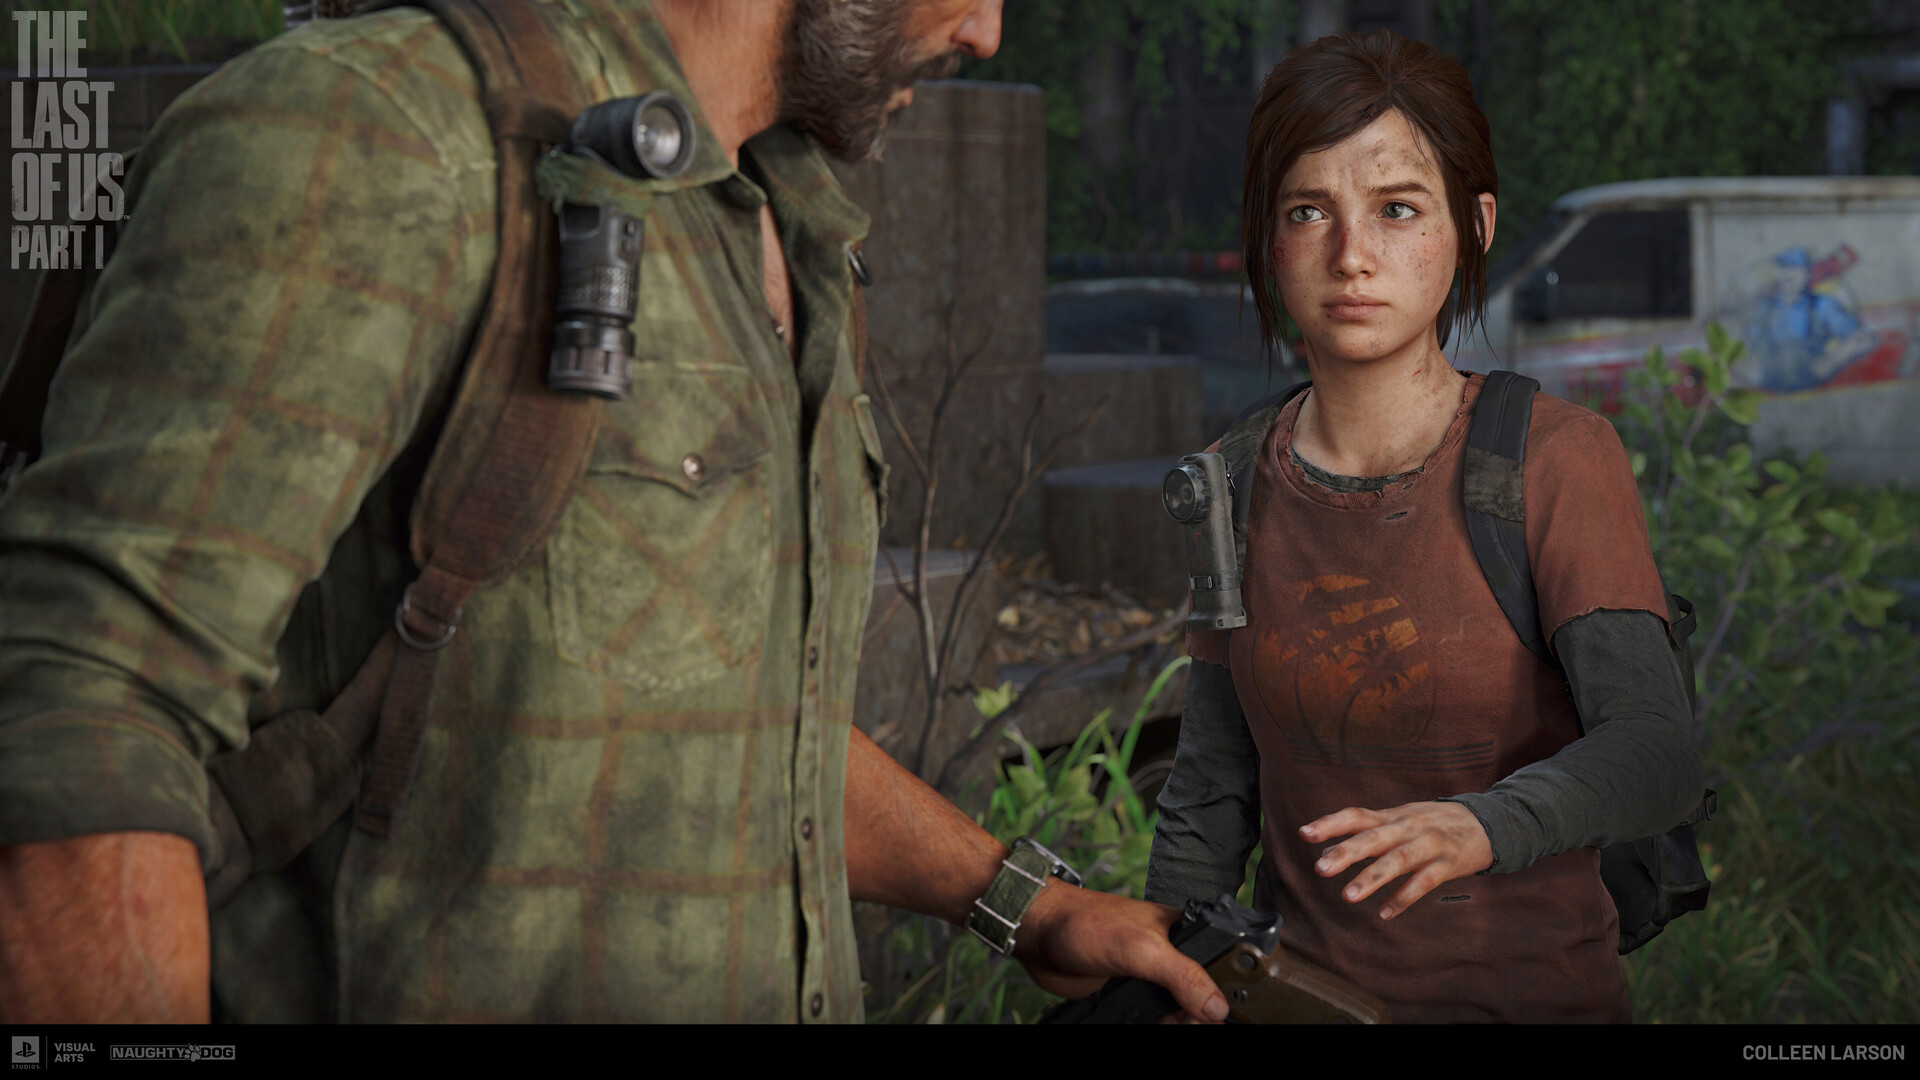 The Last of Us Part II debuts as the game for an uneasy summer